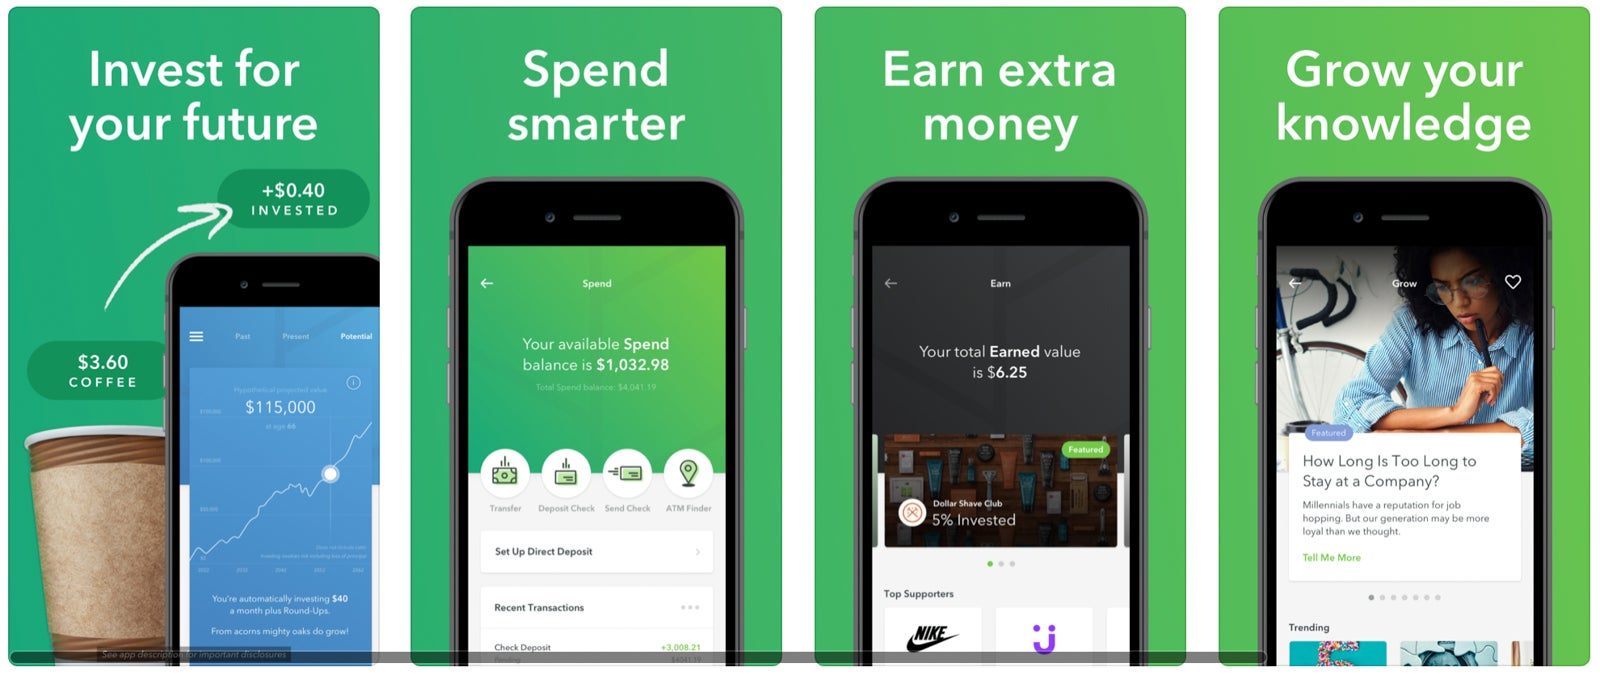 Discover the Best Investment App: Acorns - Invest Spare Change